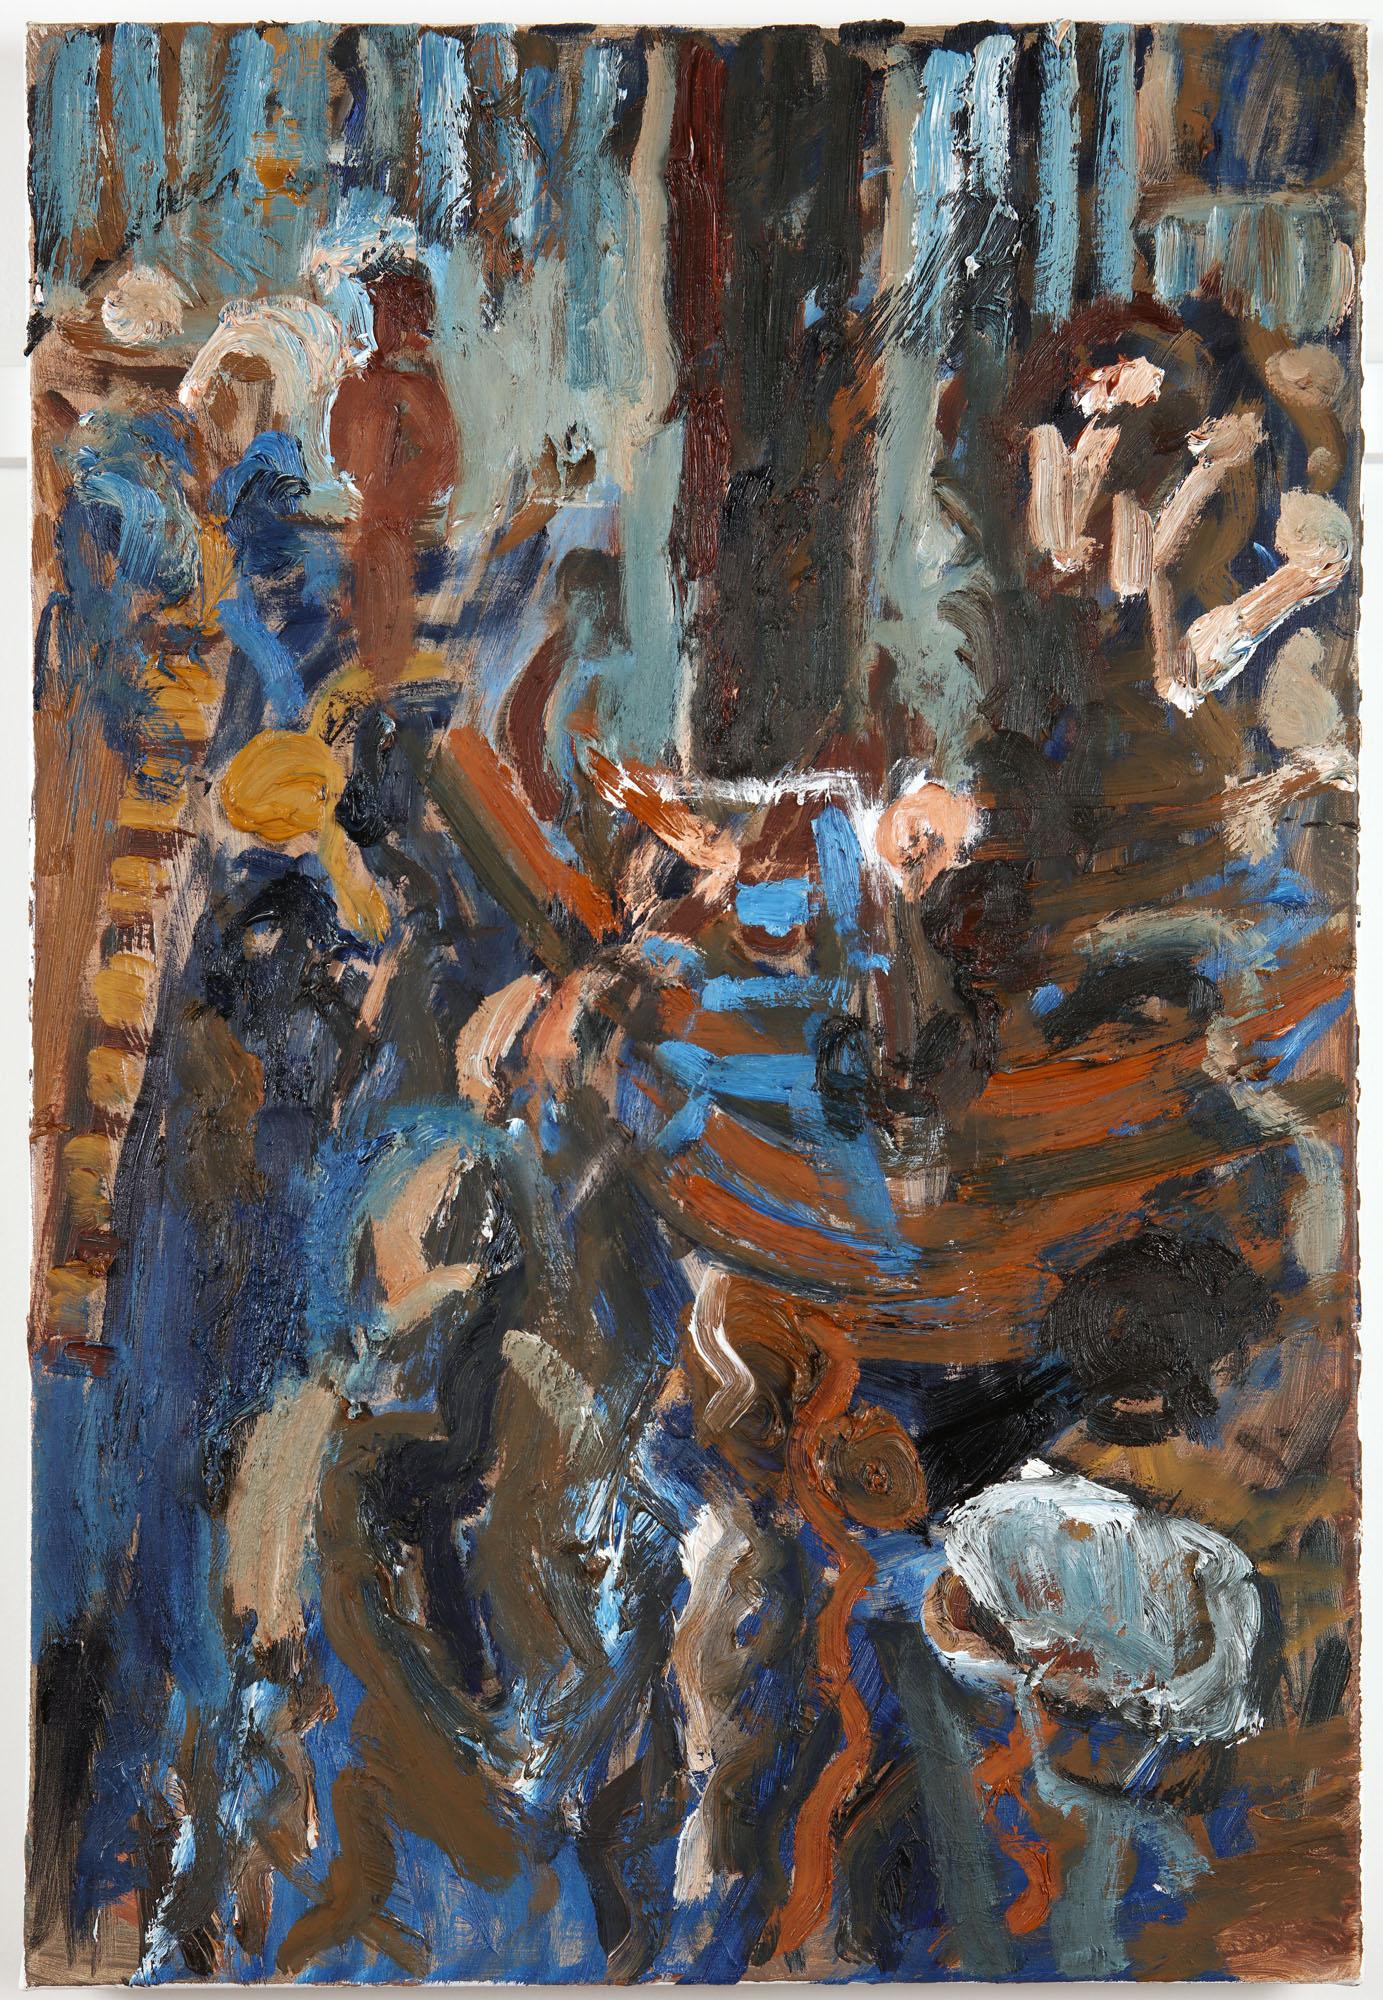 ZEBEDEE JONES Abstract Painting - 'CHESS TOURNAMENT', 2018 Oil on linen 76 x 51 cm Signed and dated verso